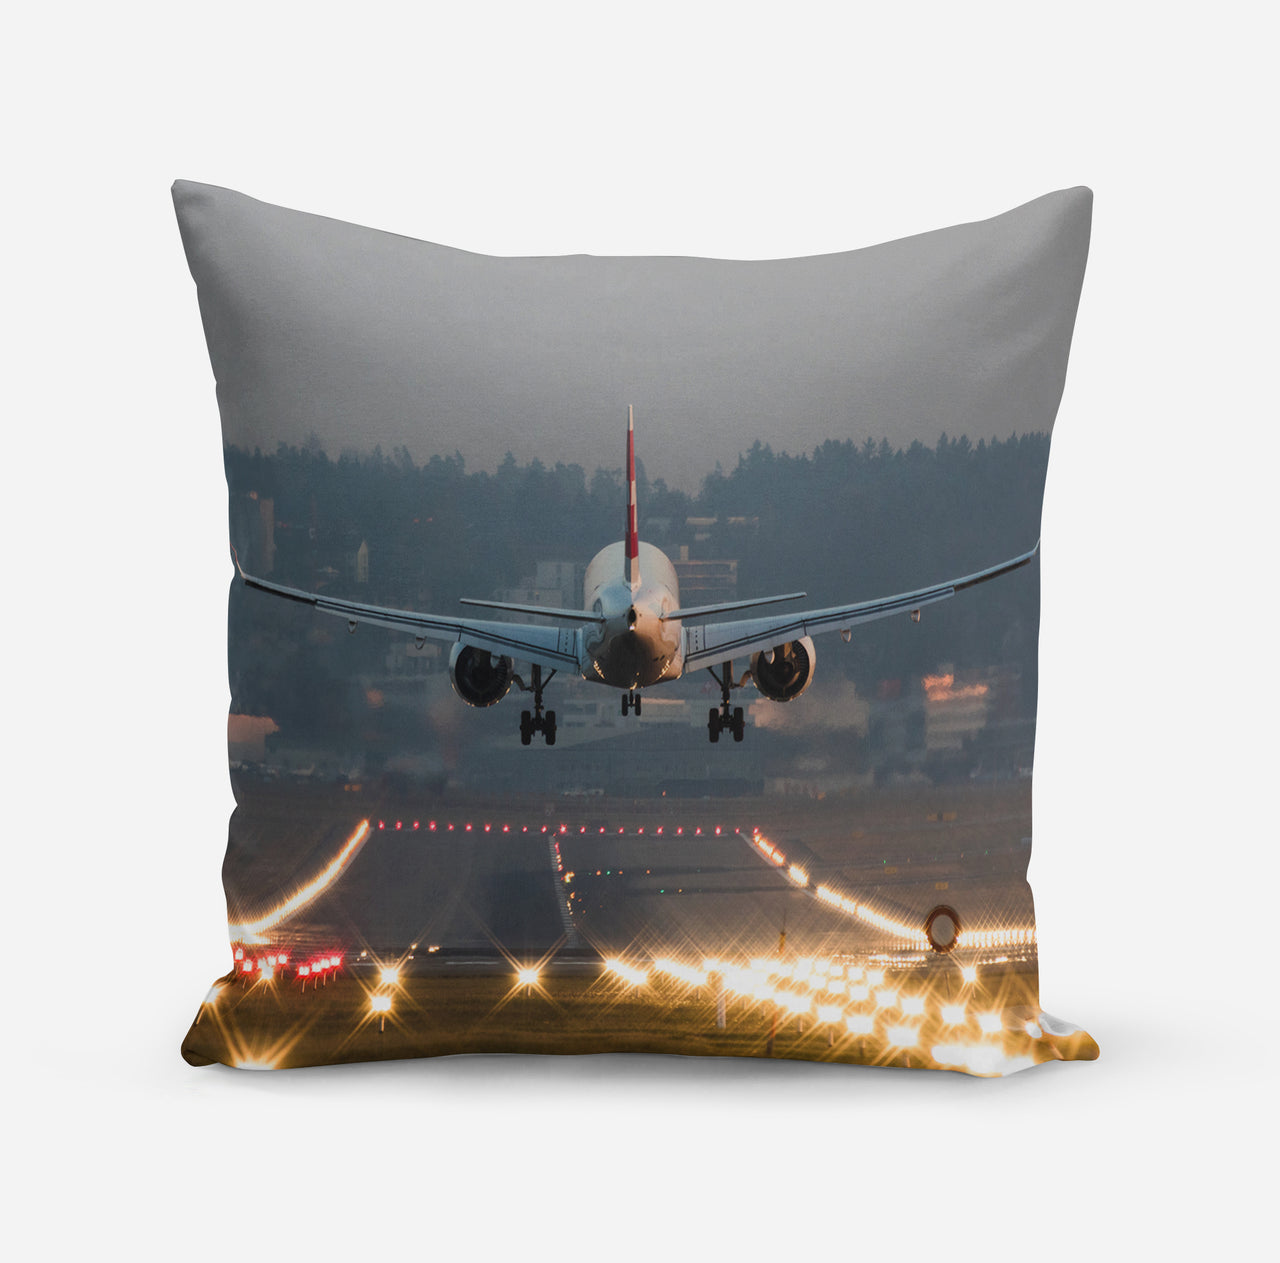 Magnificent Airplane Landing Printed Designed Pillows